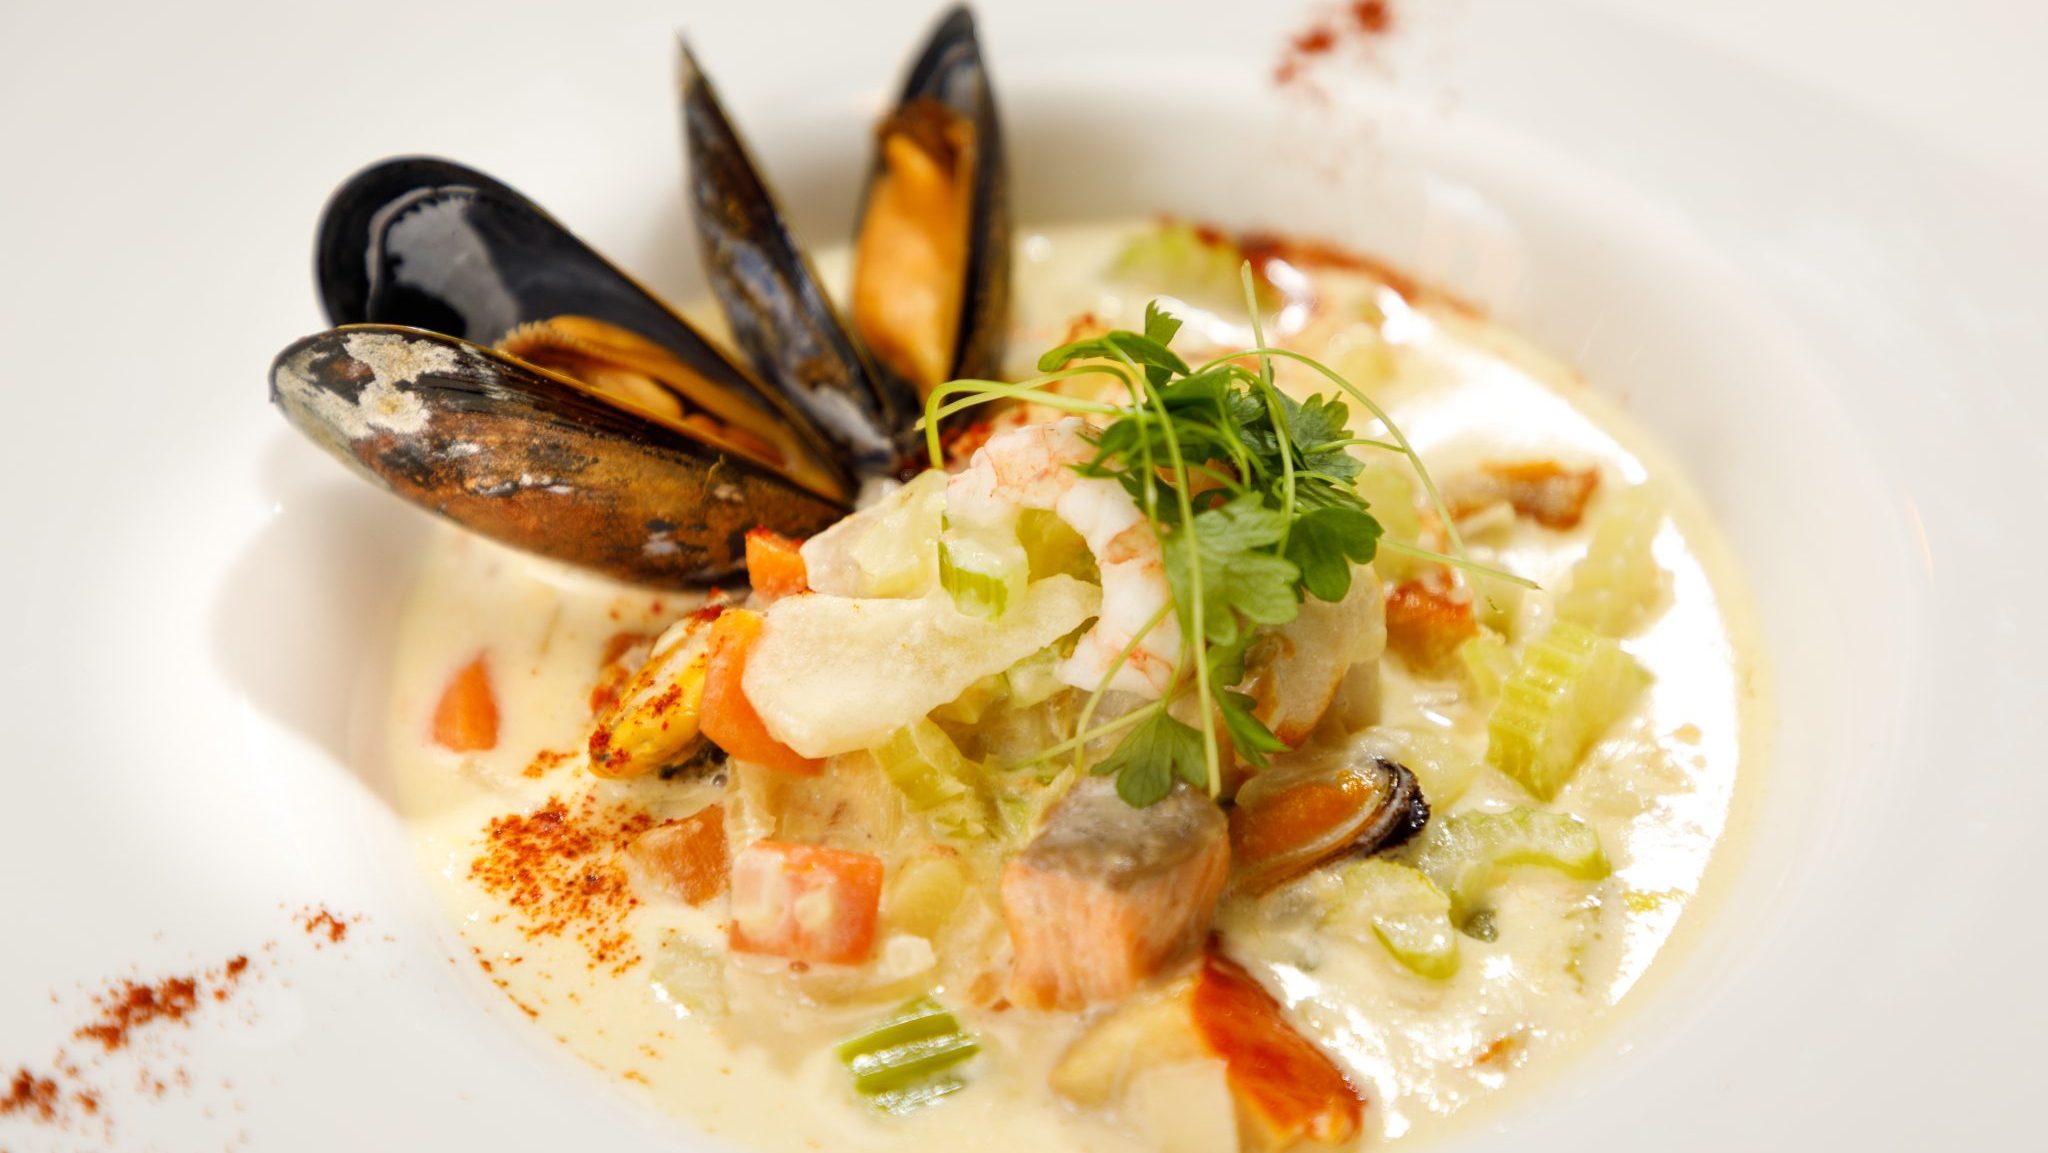 A bowl of Irish seafood chowder with mussels and salmon.